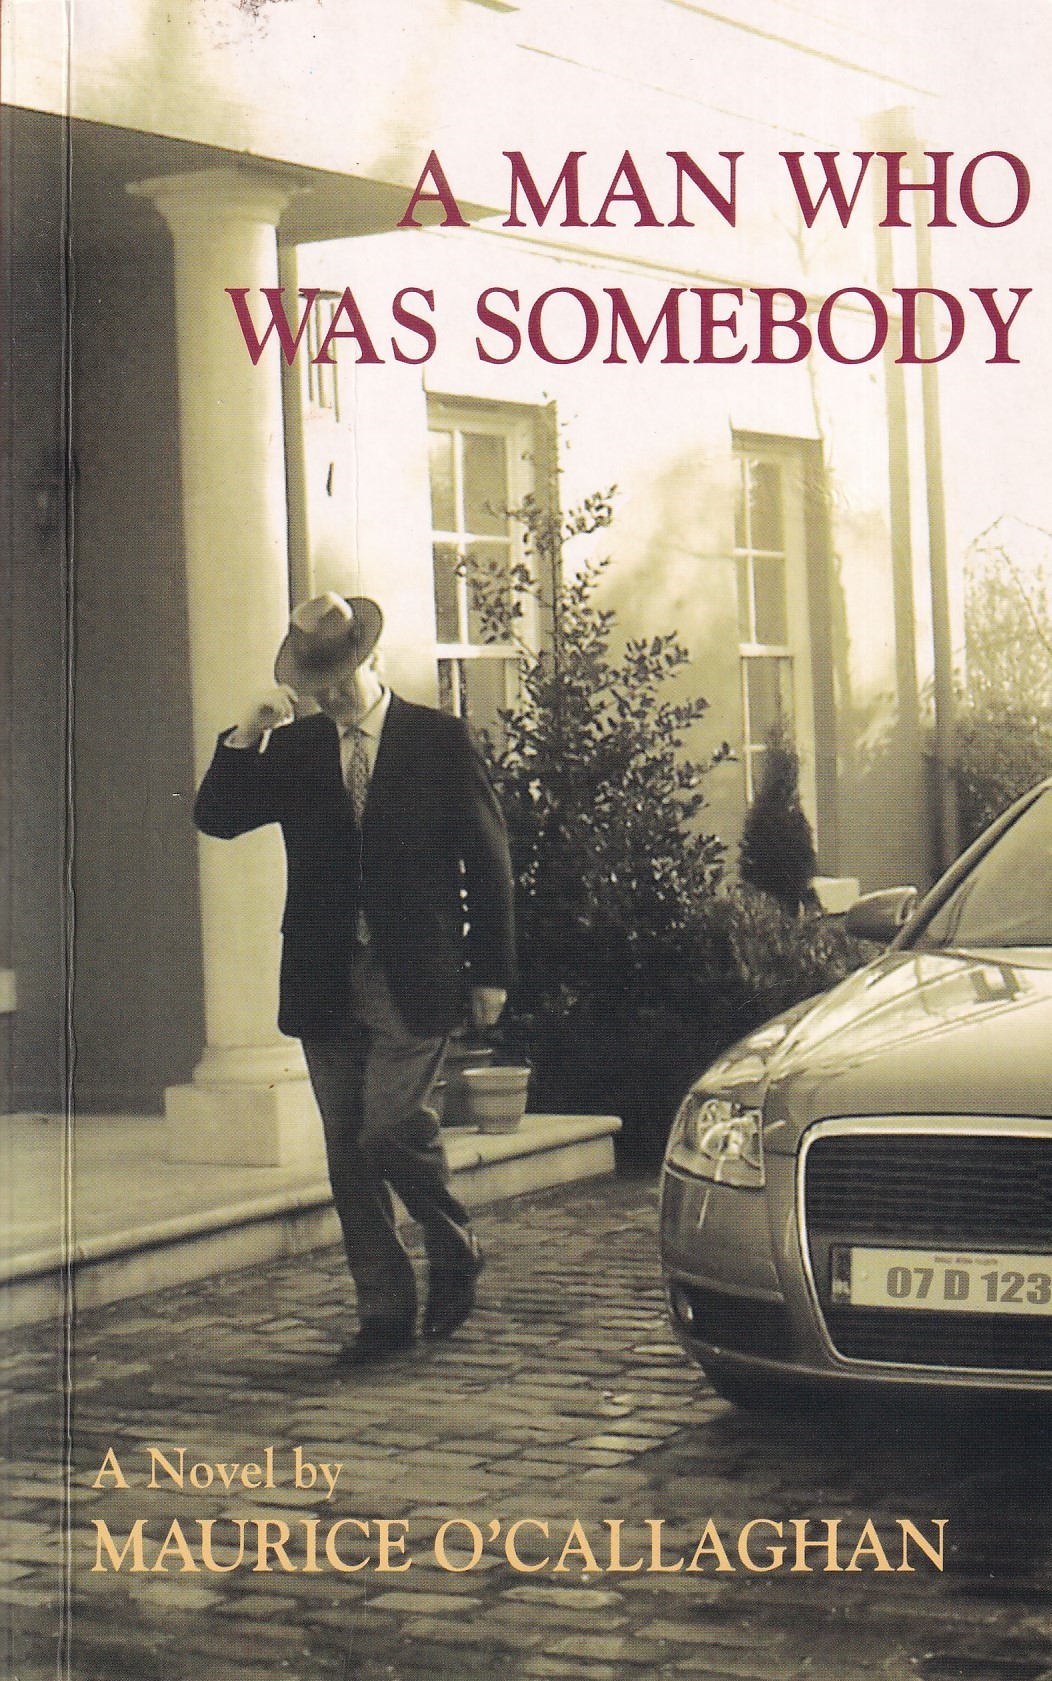 A Man Who Was Somebody [SIGNED] by Maurice O'Callaghan